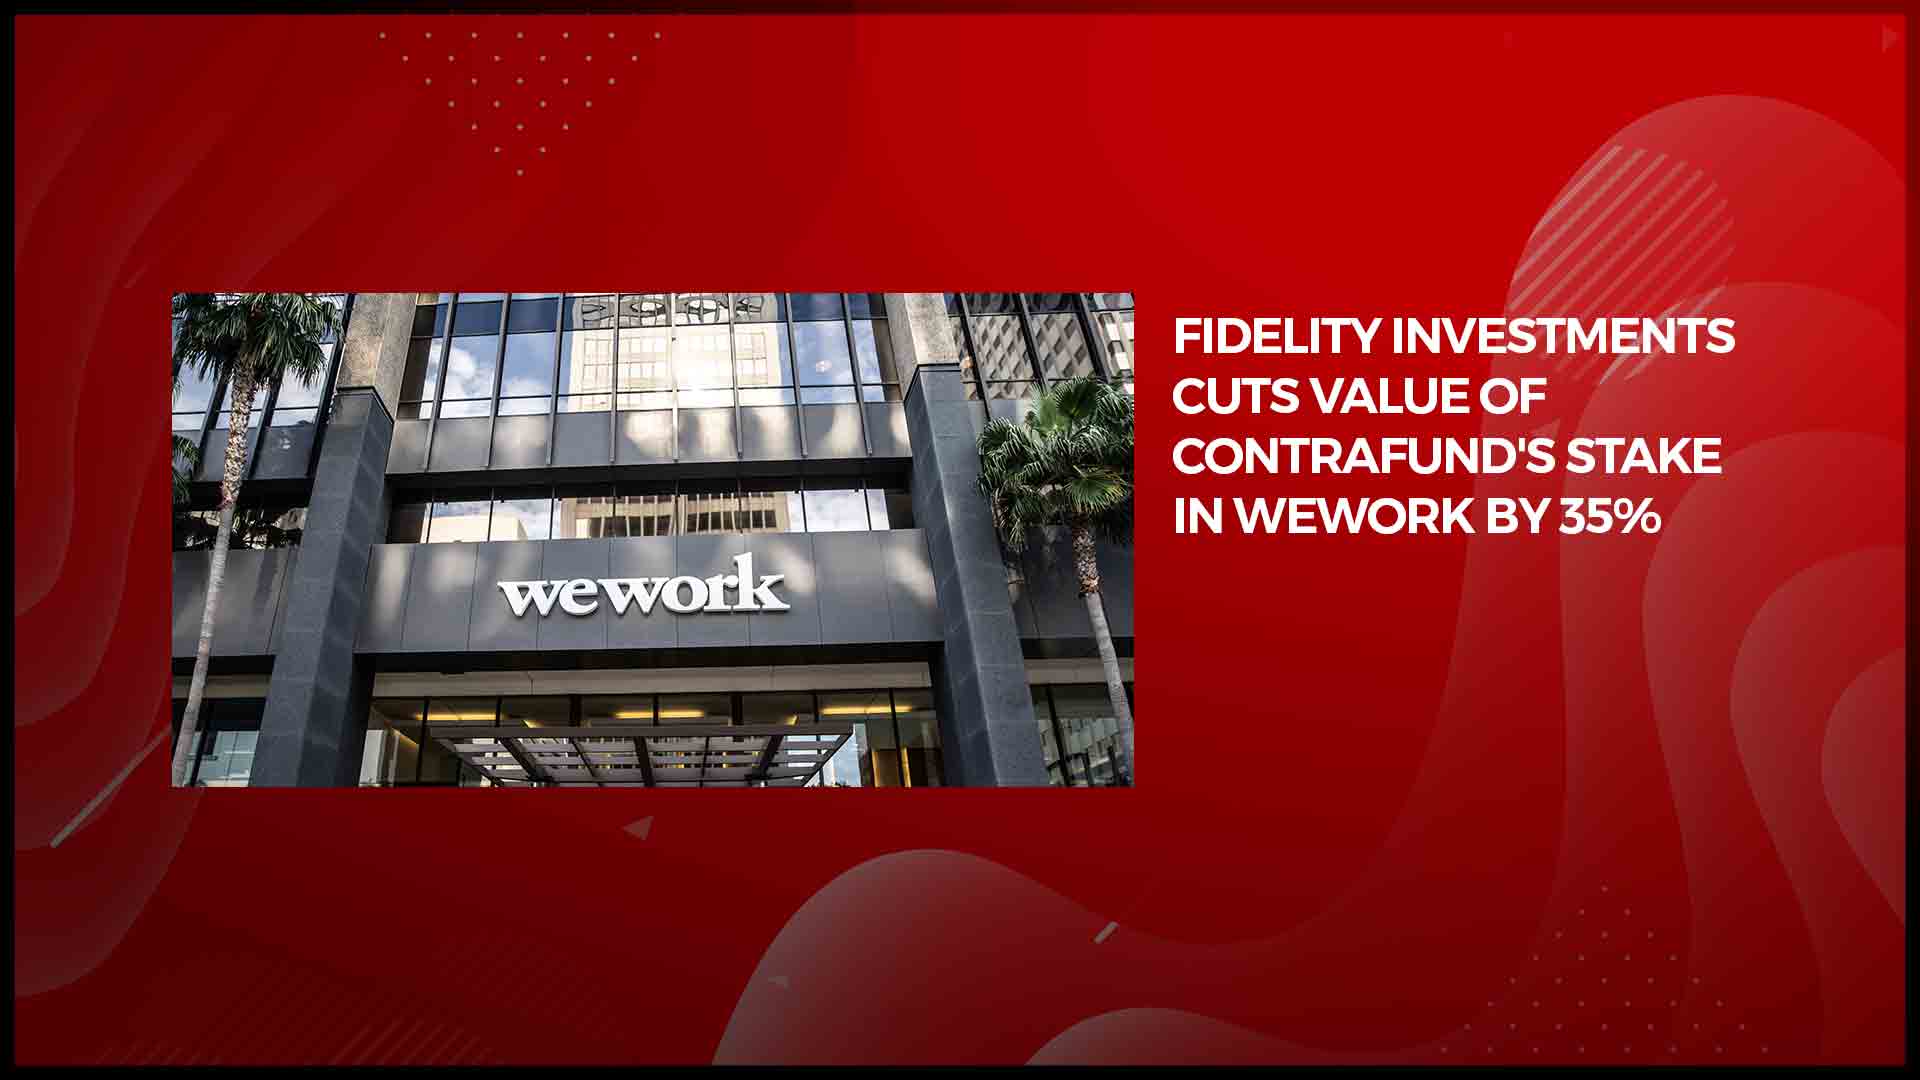 Fidelity Investments cuts value of Contrafund's stake in WeWork by 35%